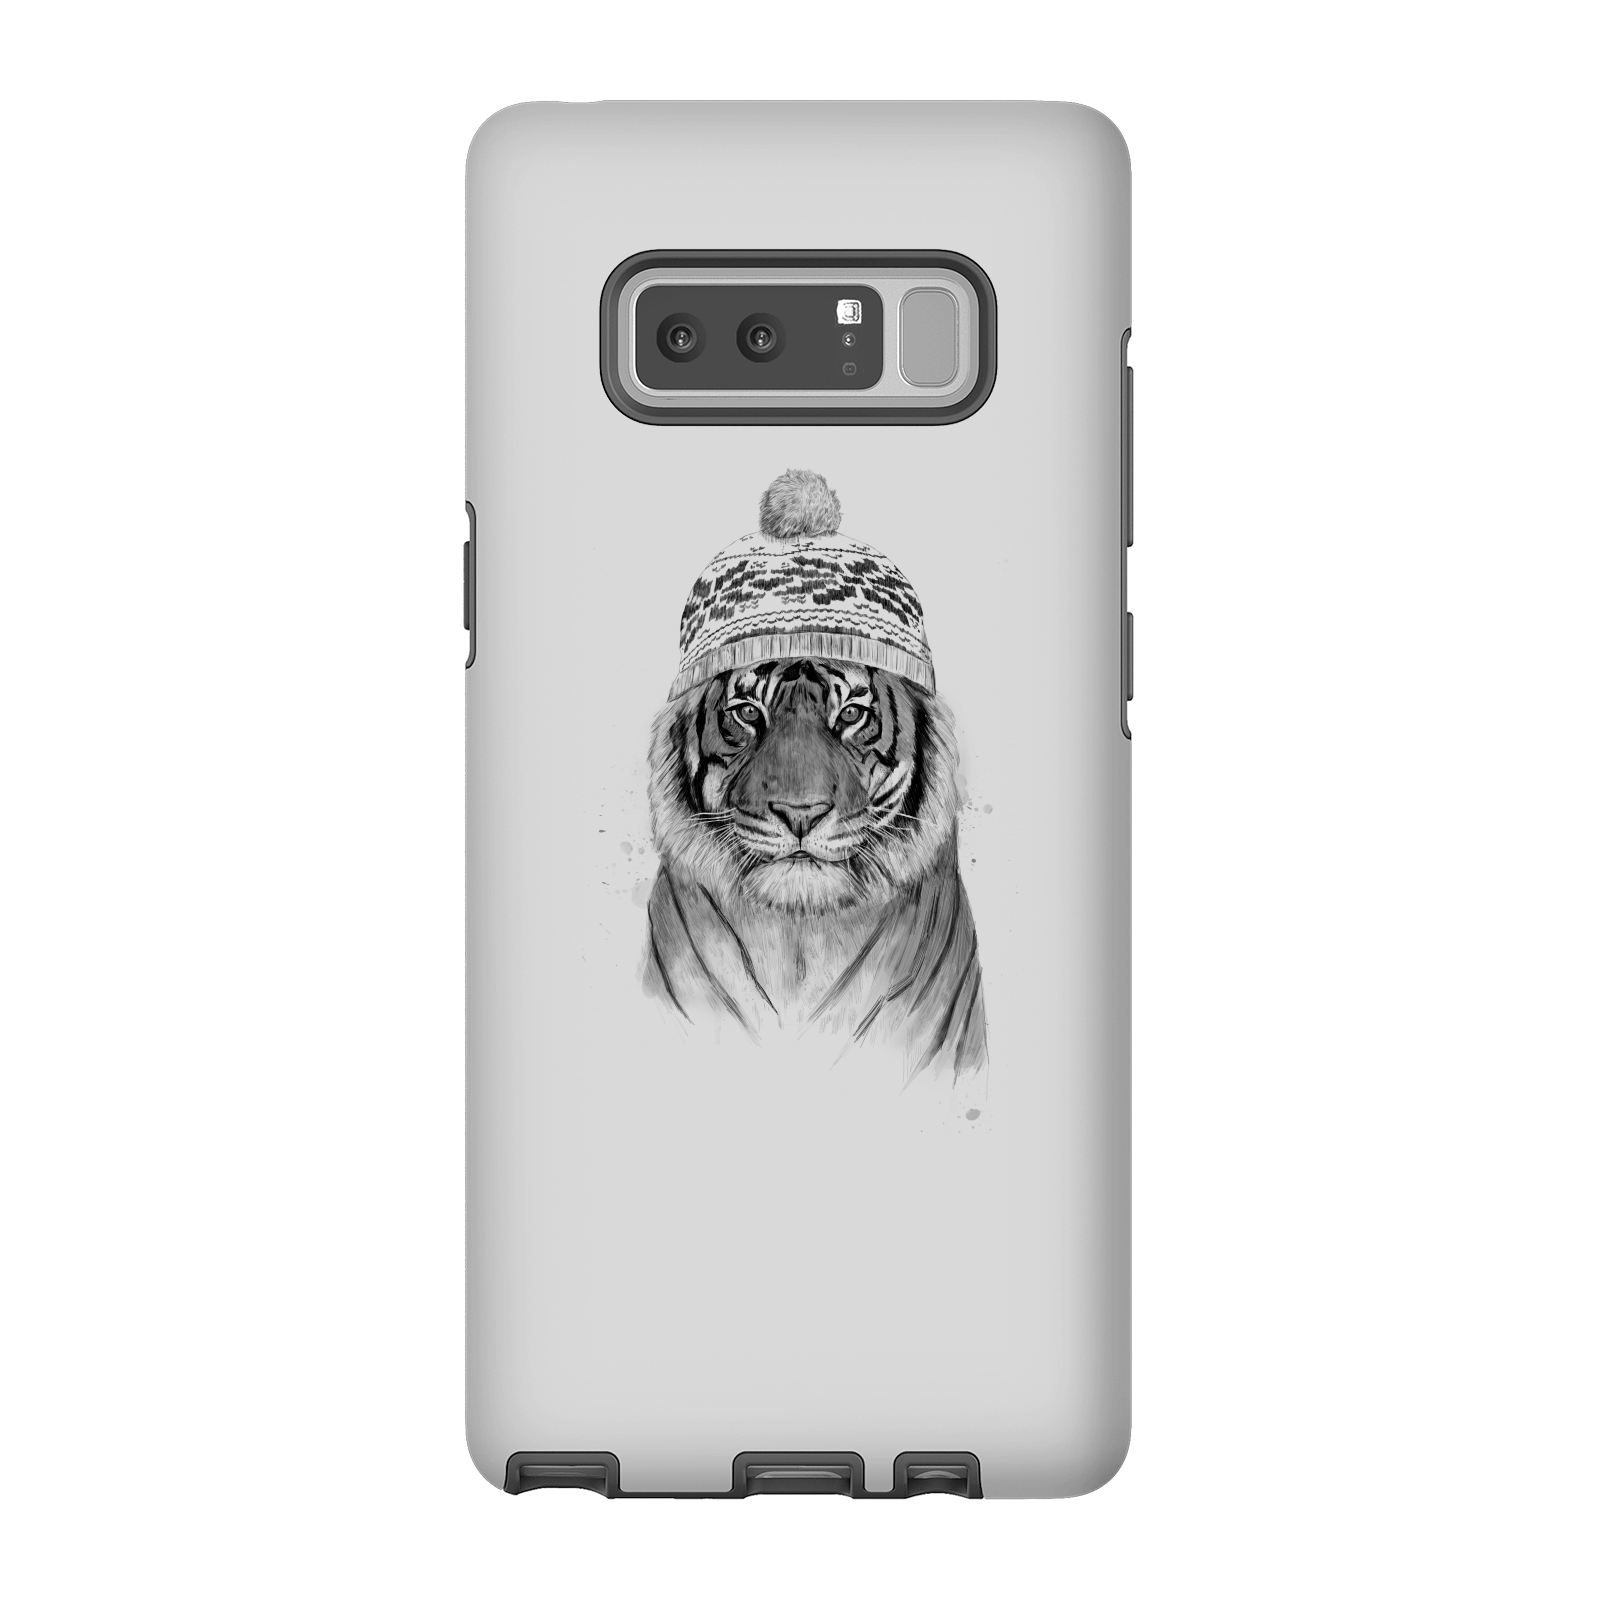 balazs solti winter tiger phone case for iphone and android - samsung note 8 - tough case - matte